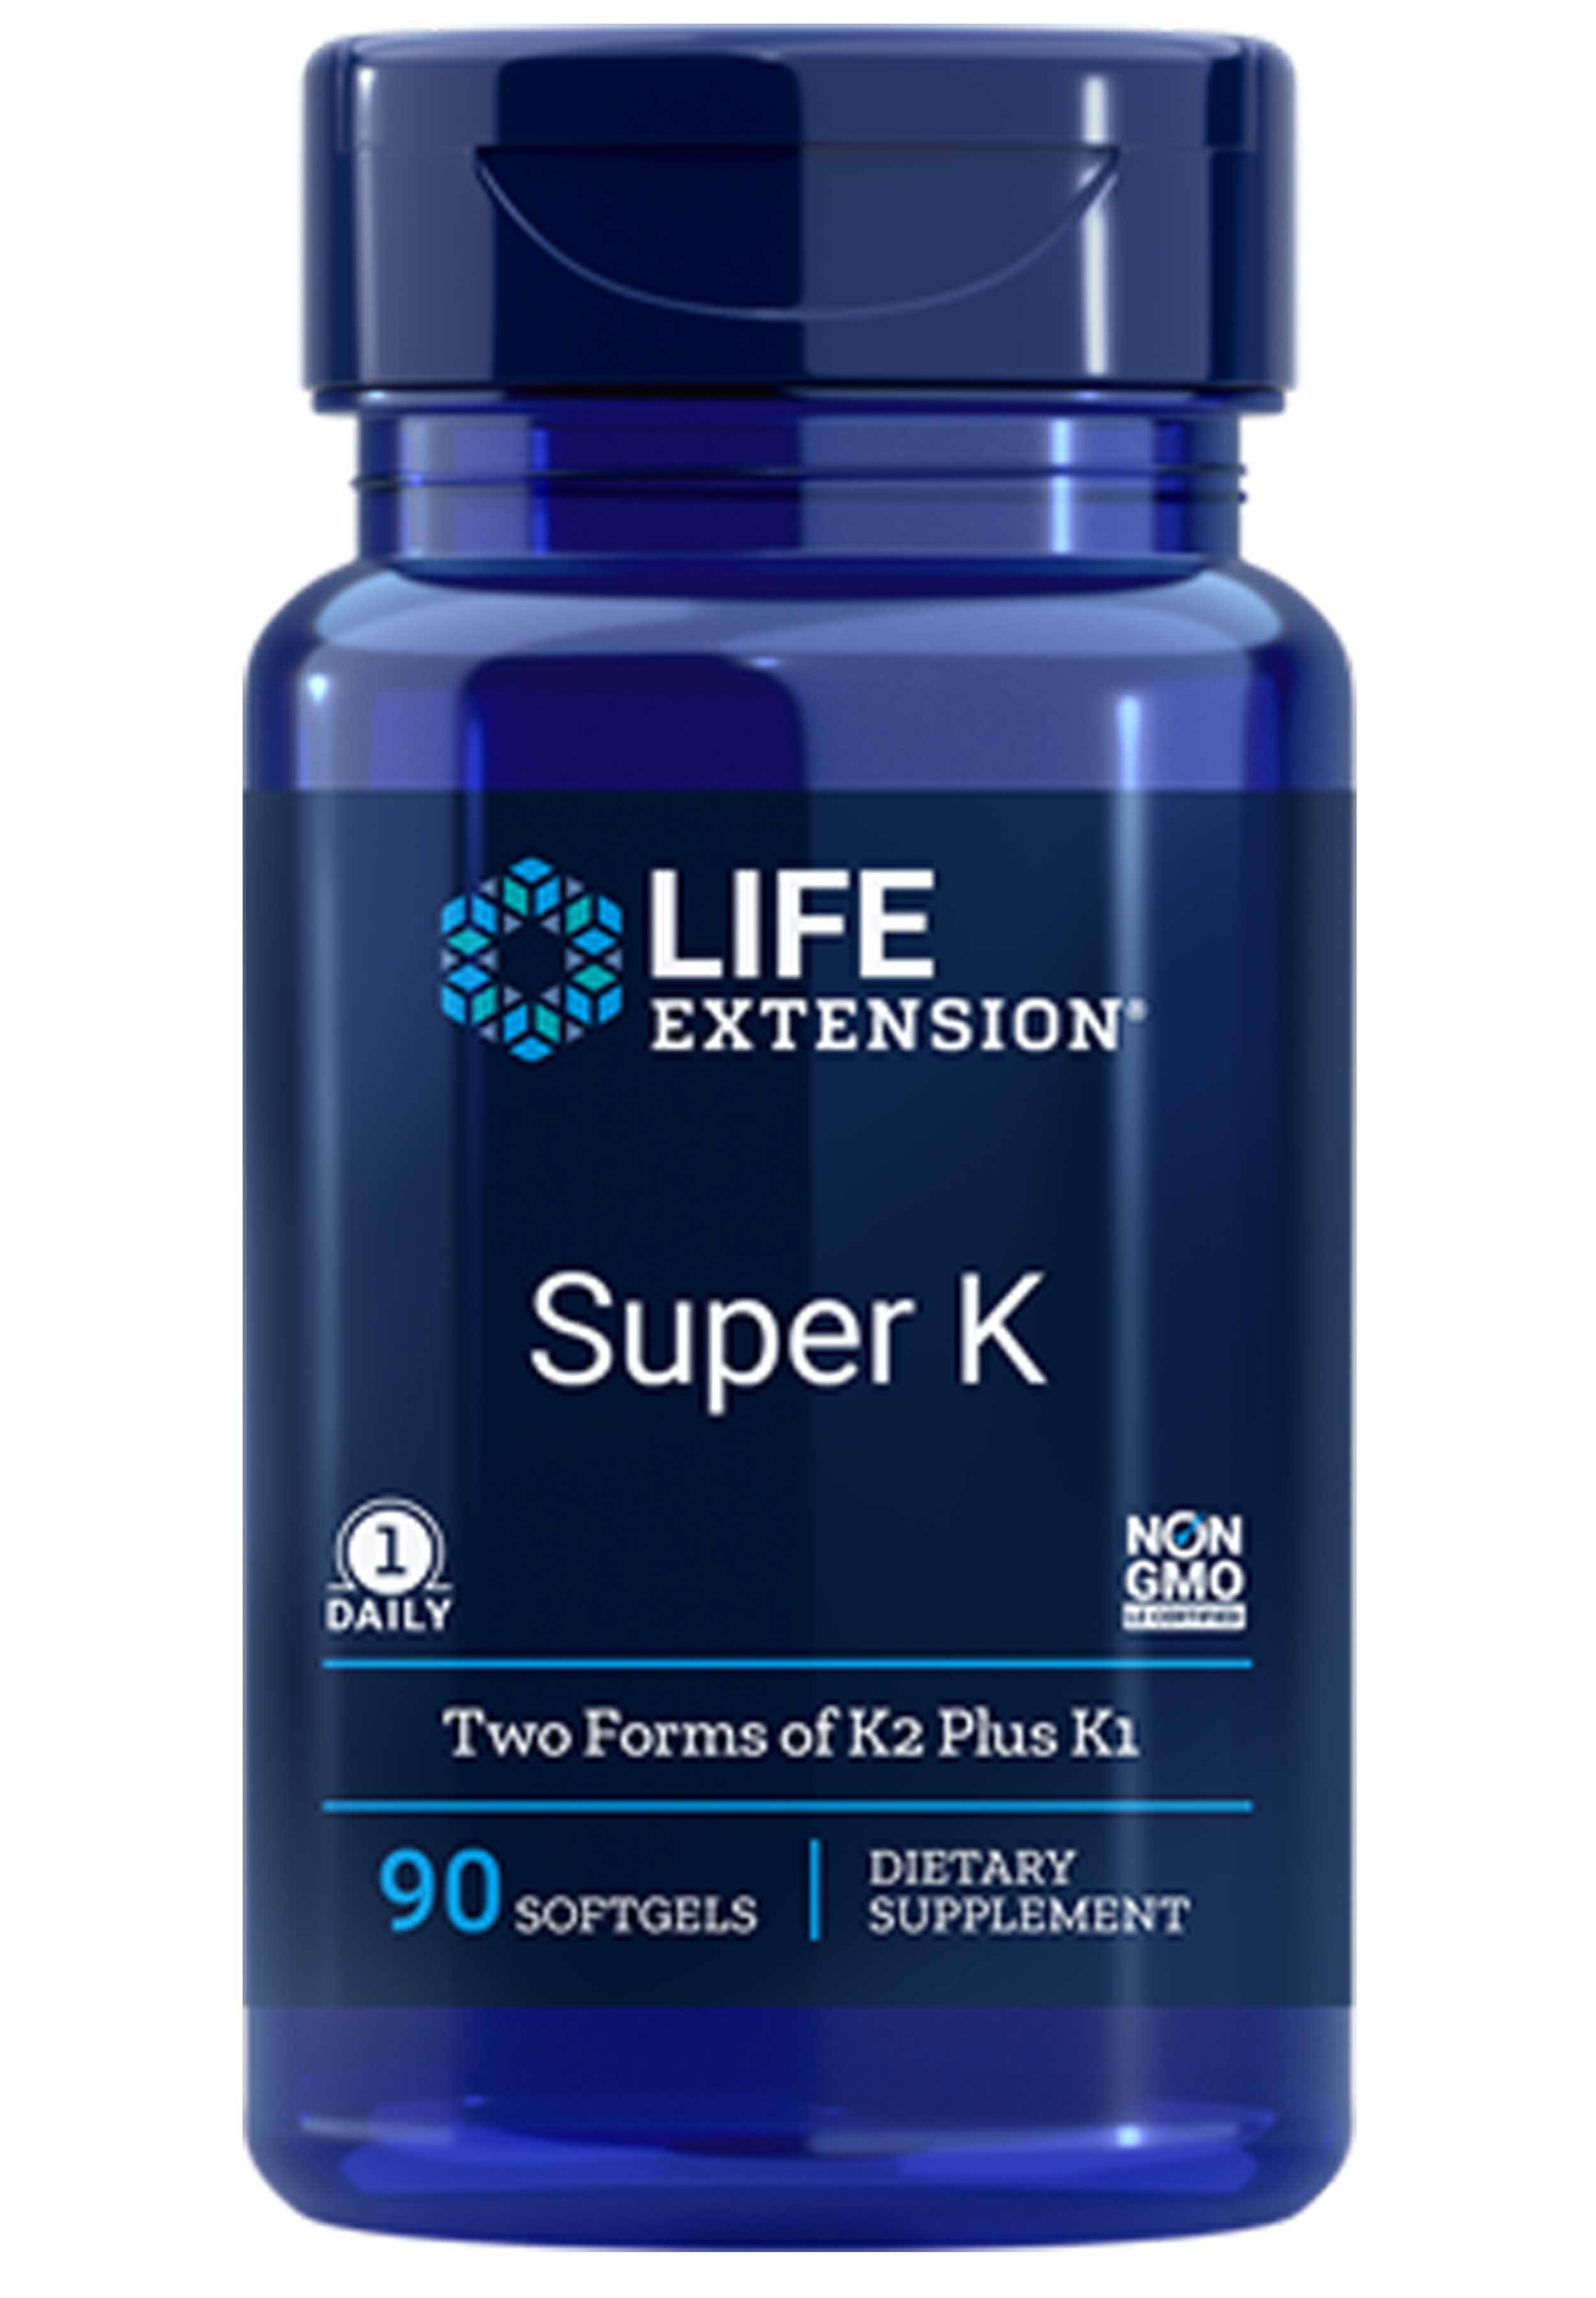 Life Extension Super K (with Advanced K2 Complex)